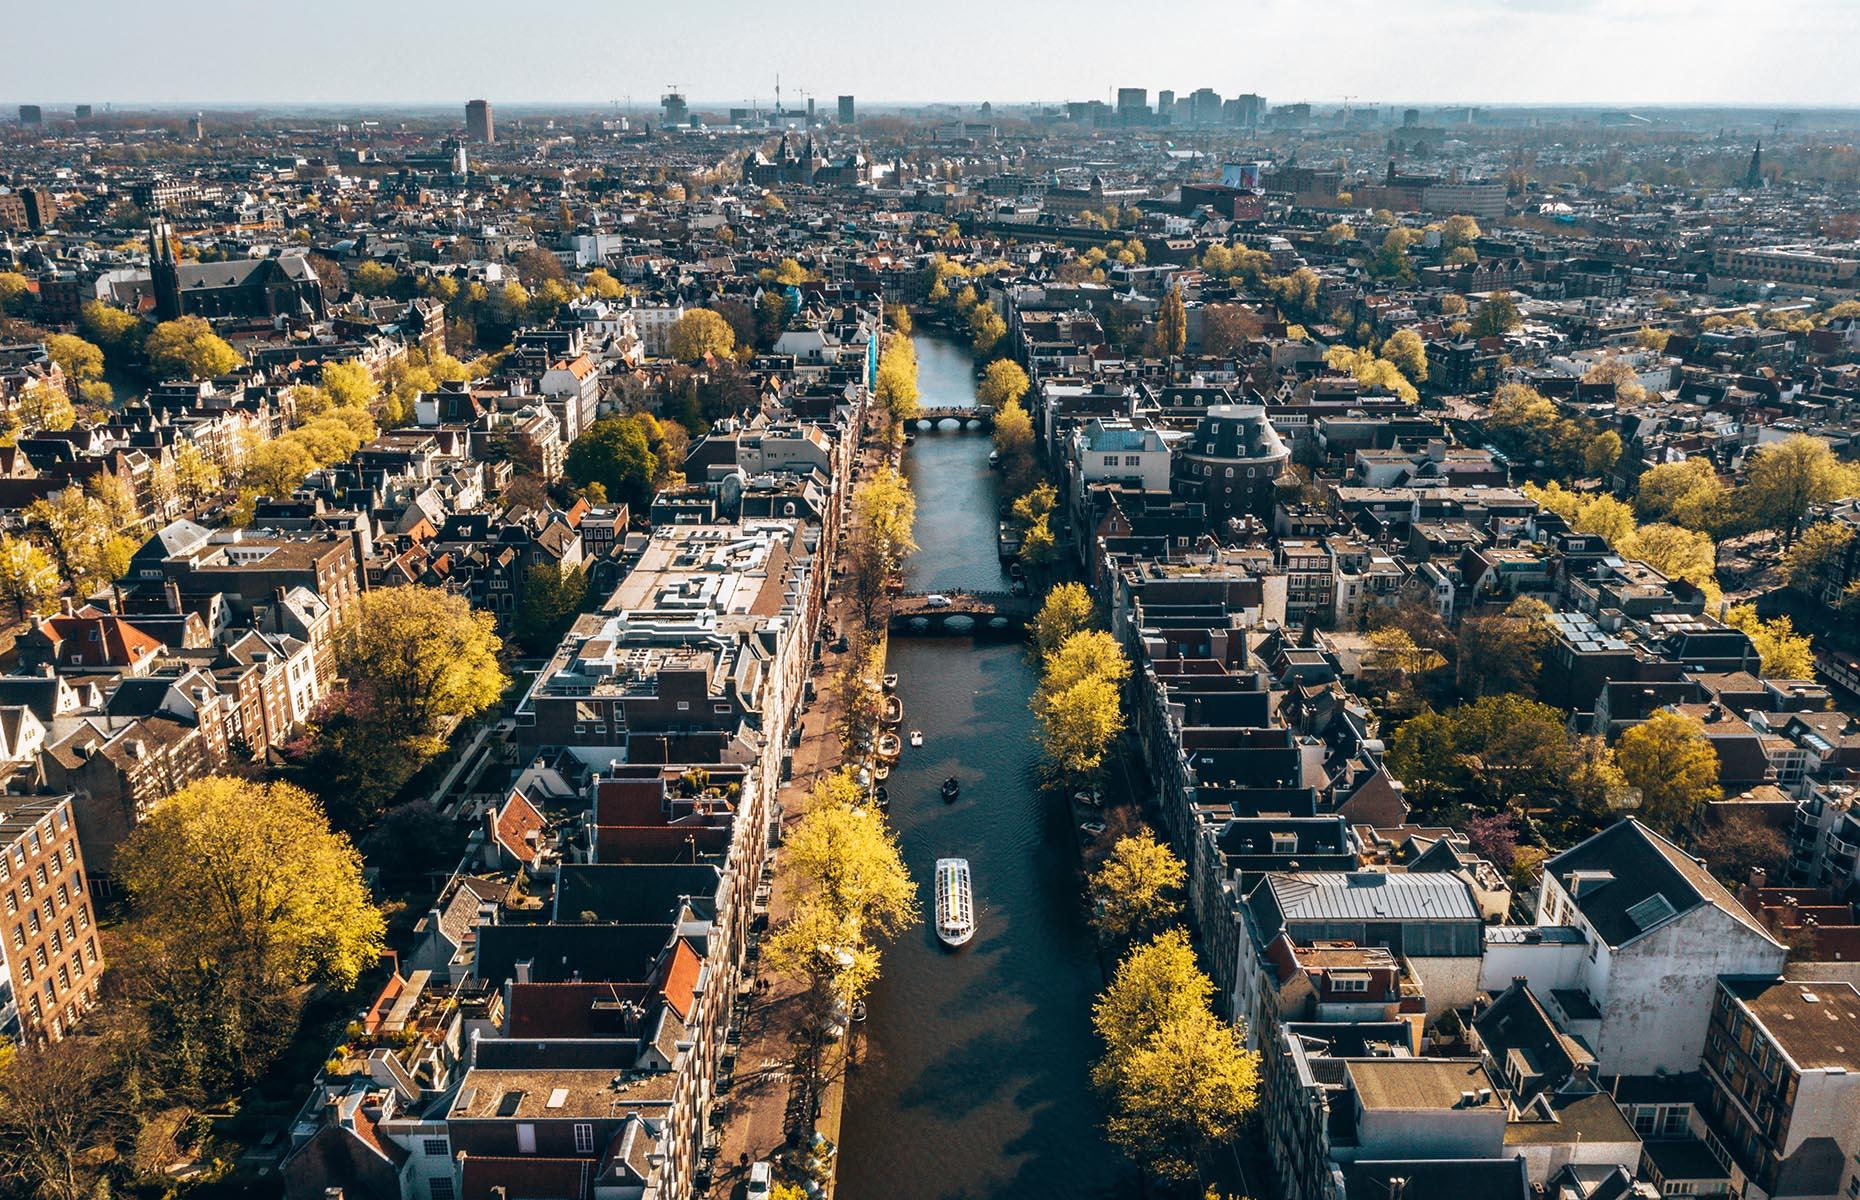 This relatively small capital is best known for its unique architecture and canals as well as cycling. The city claims to have more than 1,200 bridges.